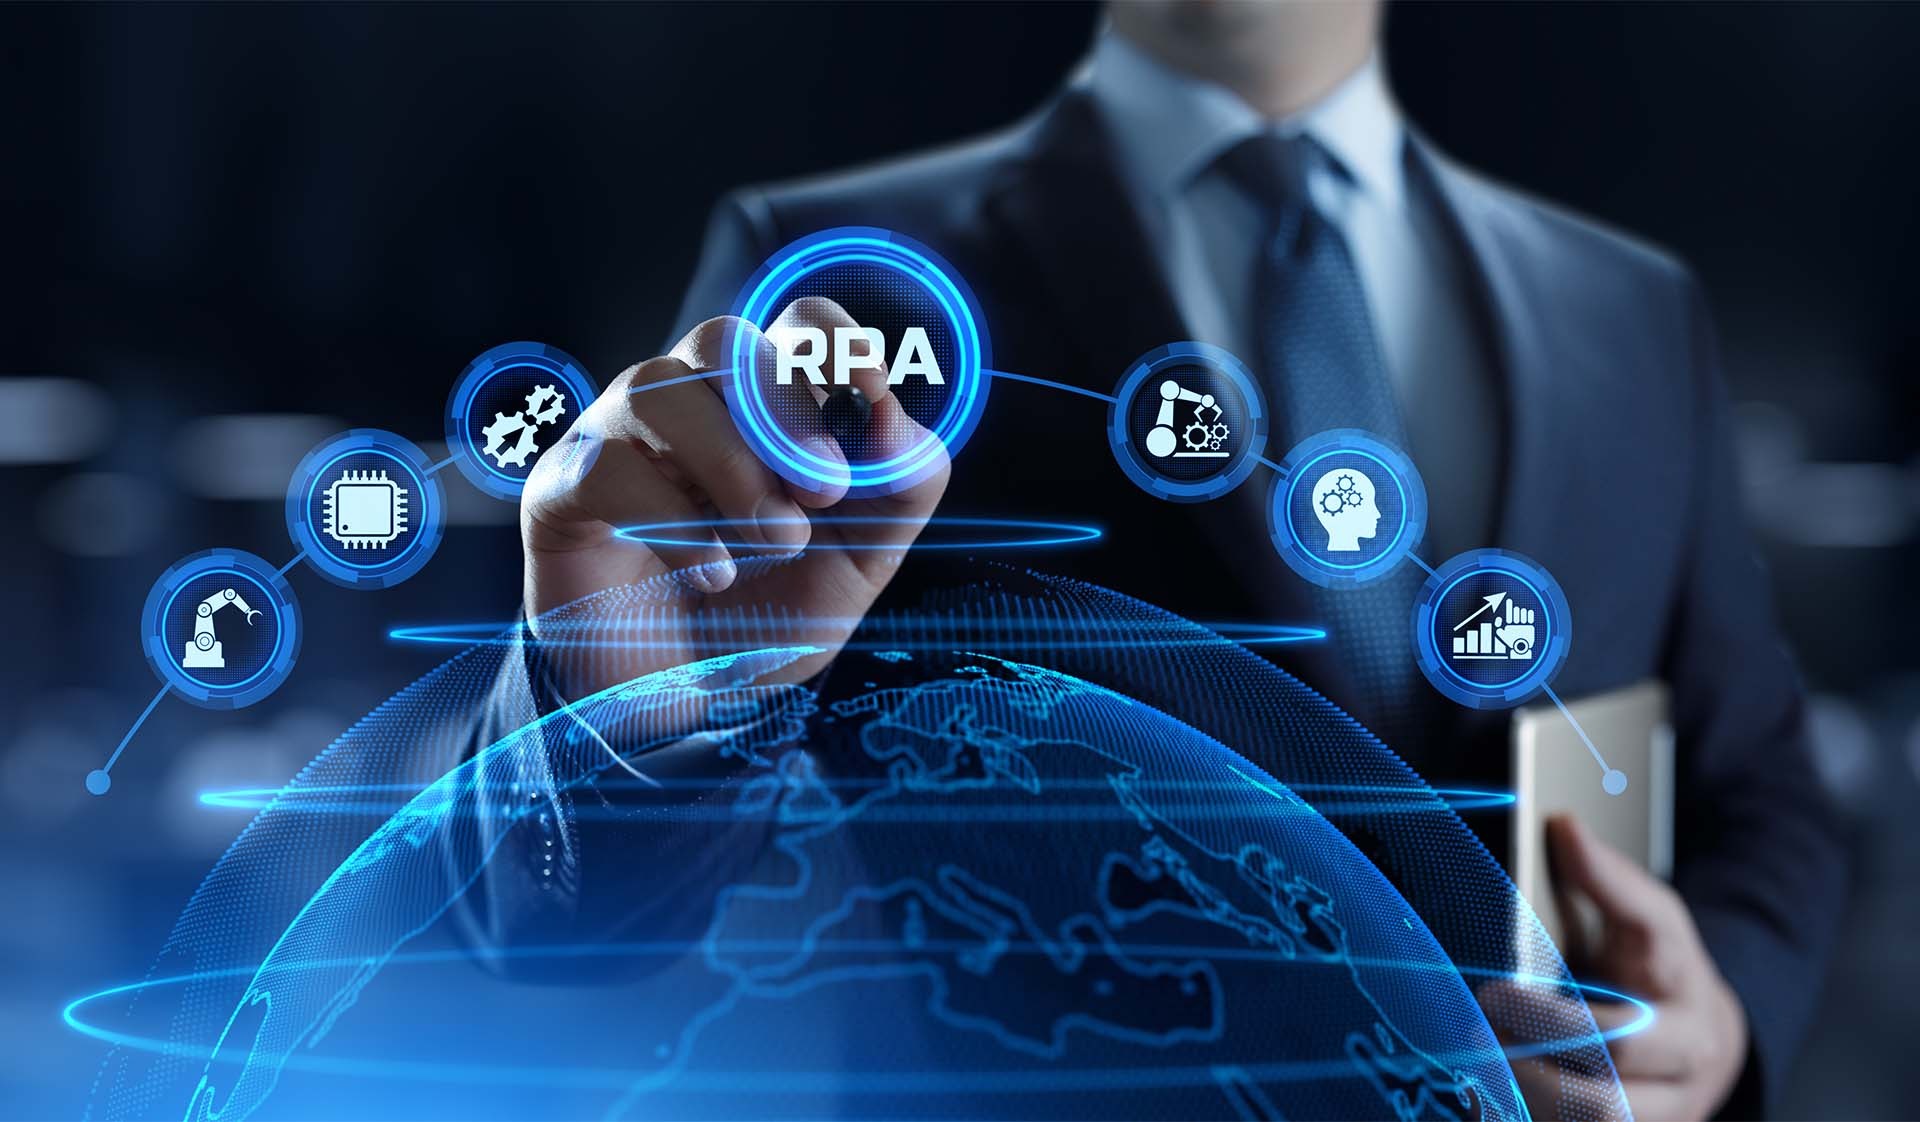 What are the benefits of RPA Robotic Process Automation?